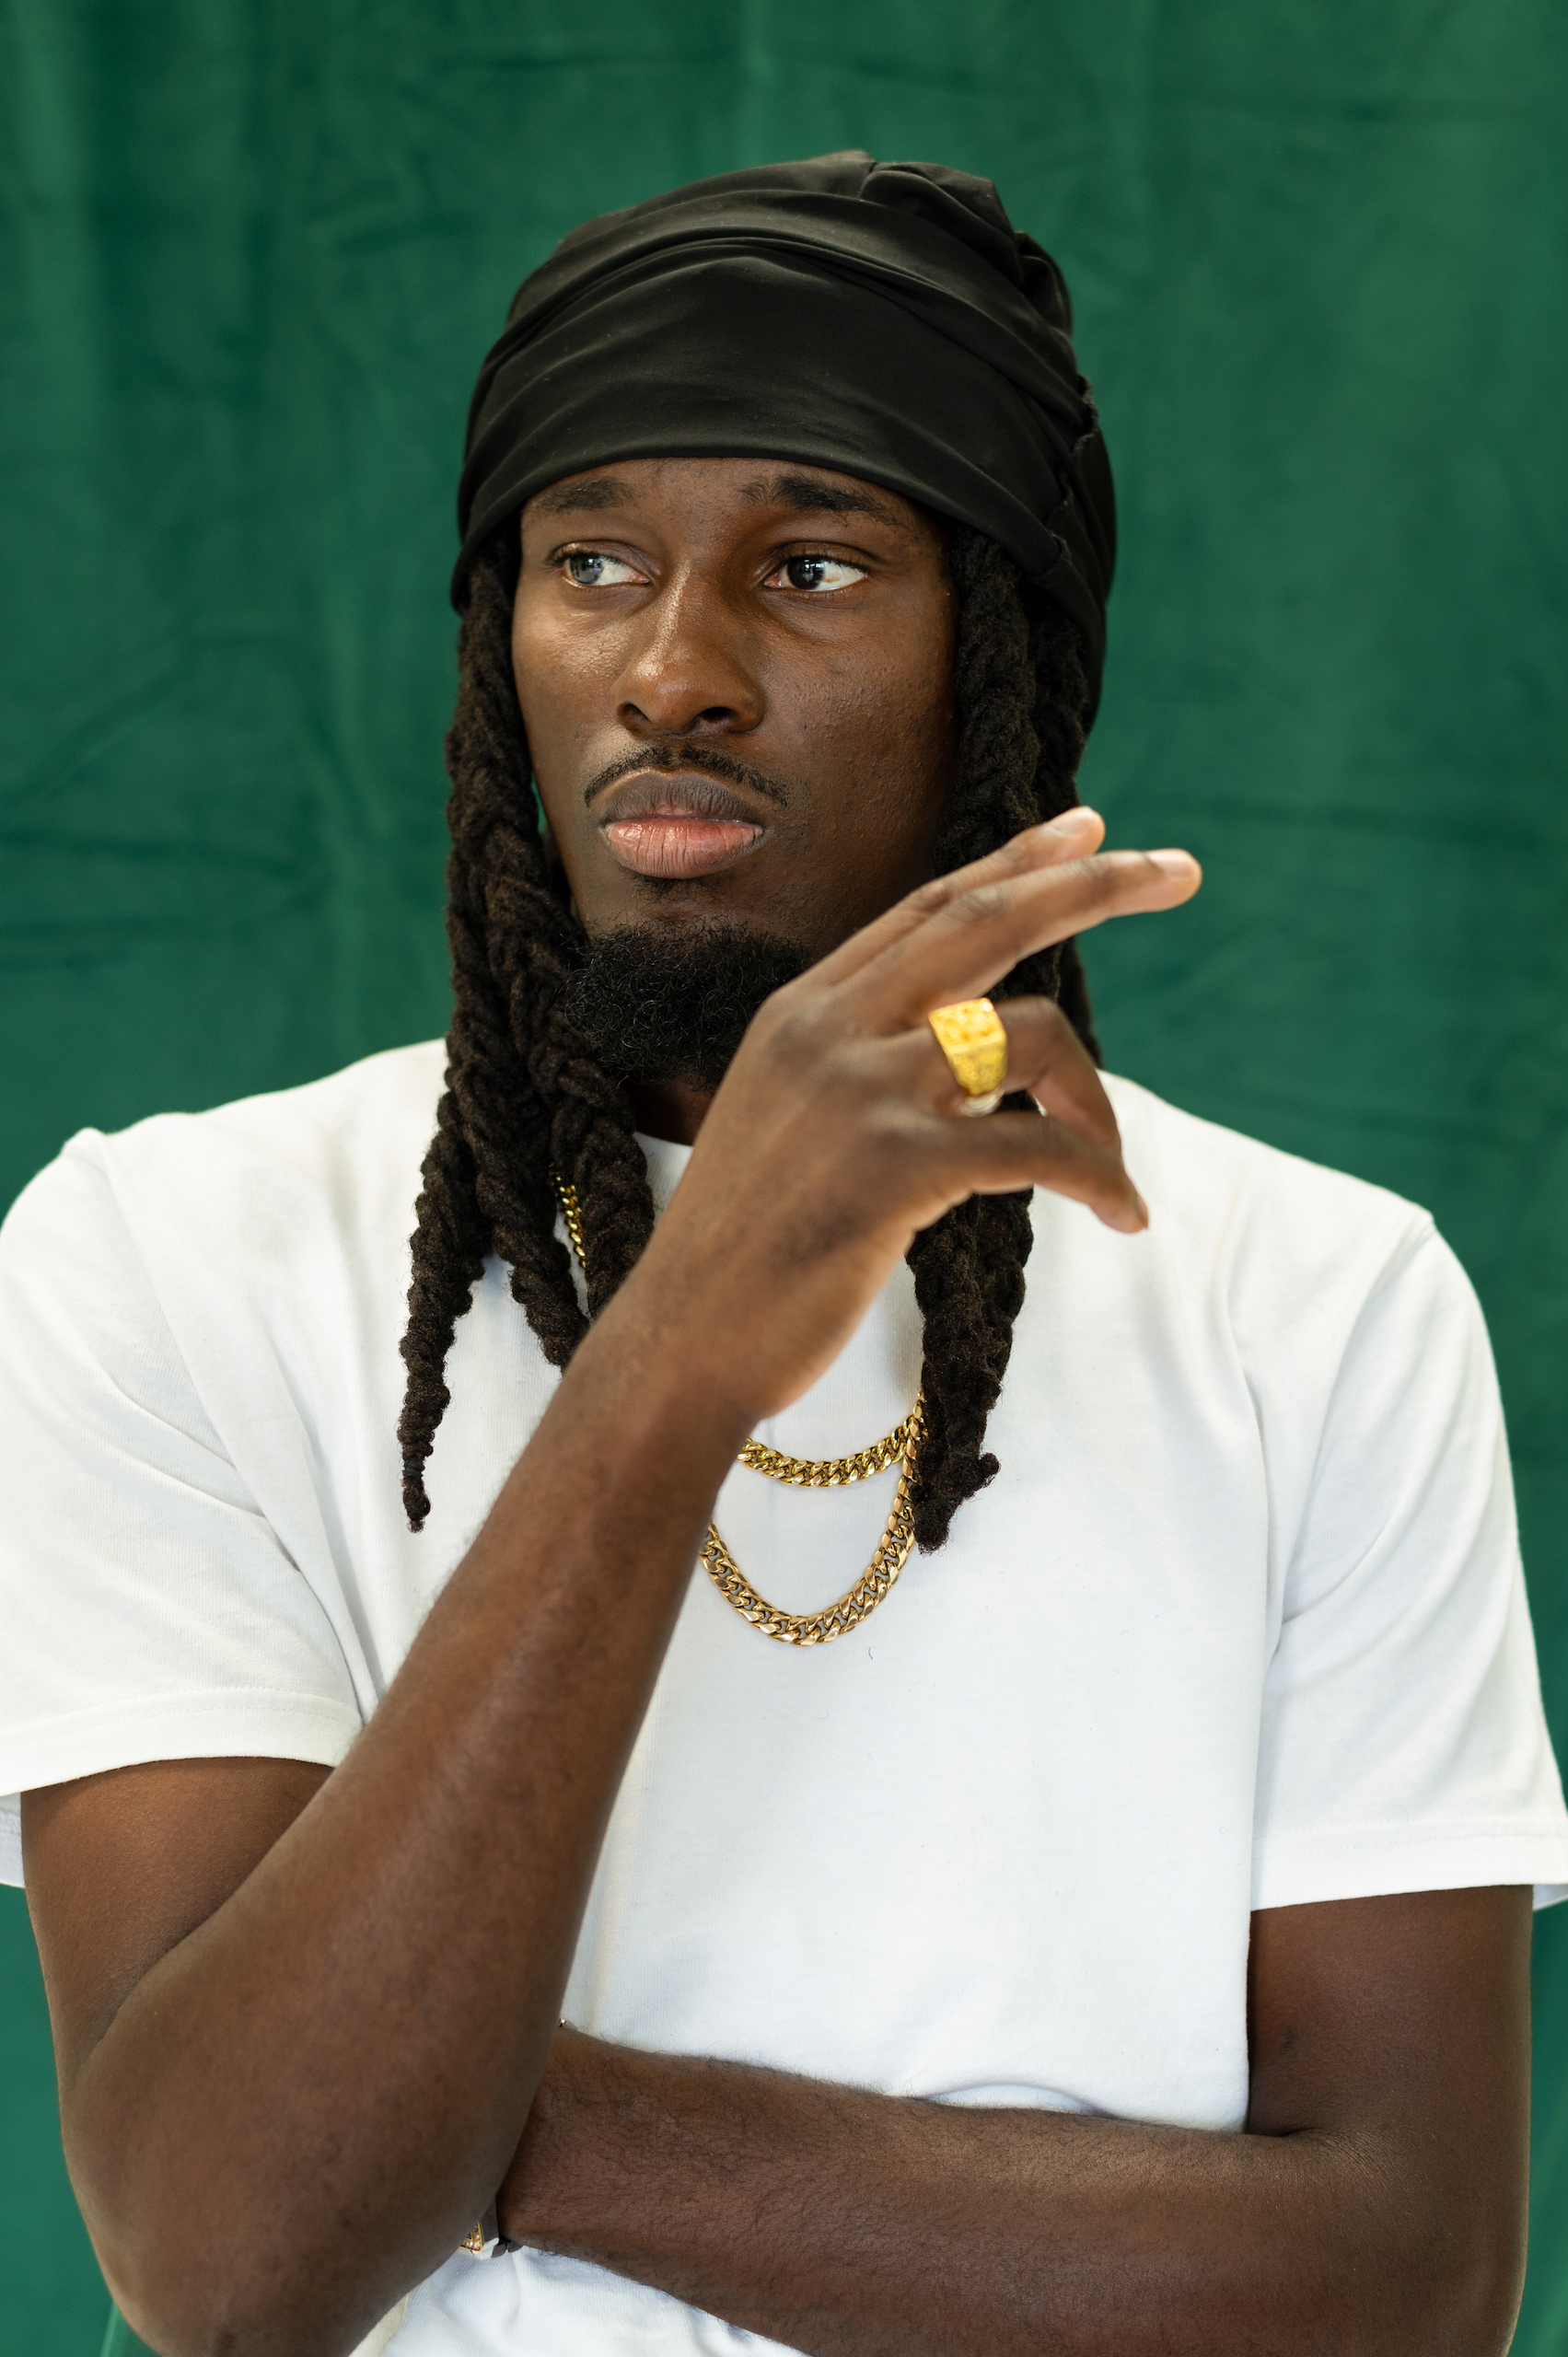 A Black man with thick locks spilling from under a black silk scarf on his head. He is wearing a white tee with gold chains, and is gesturing with his hand decorated with a large golden ring.